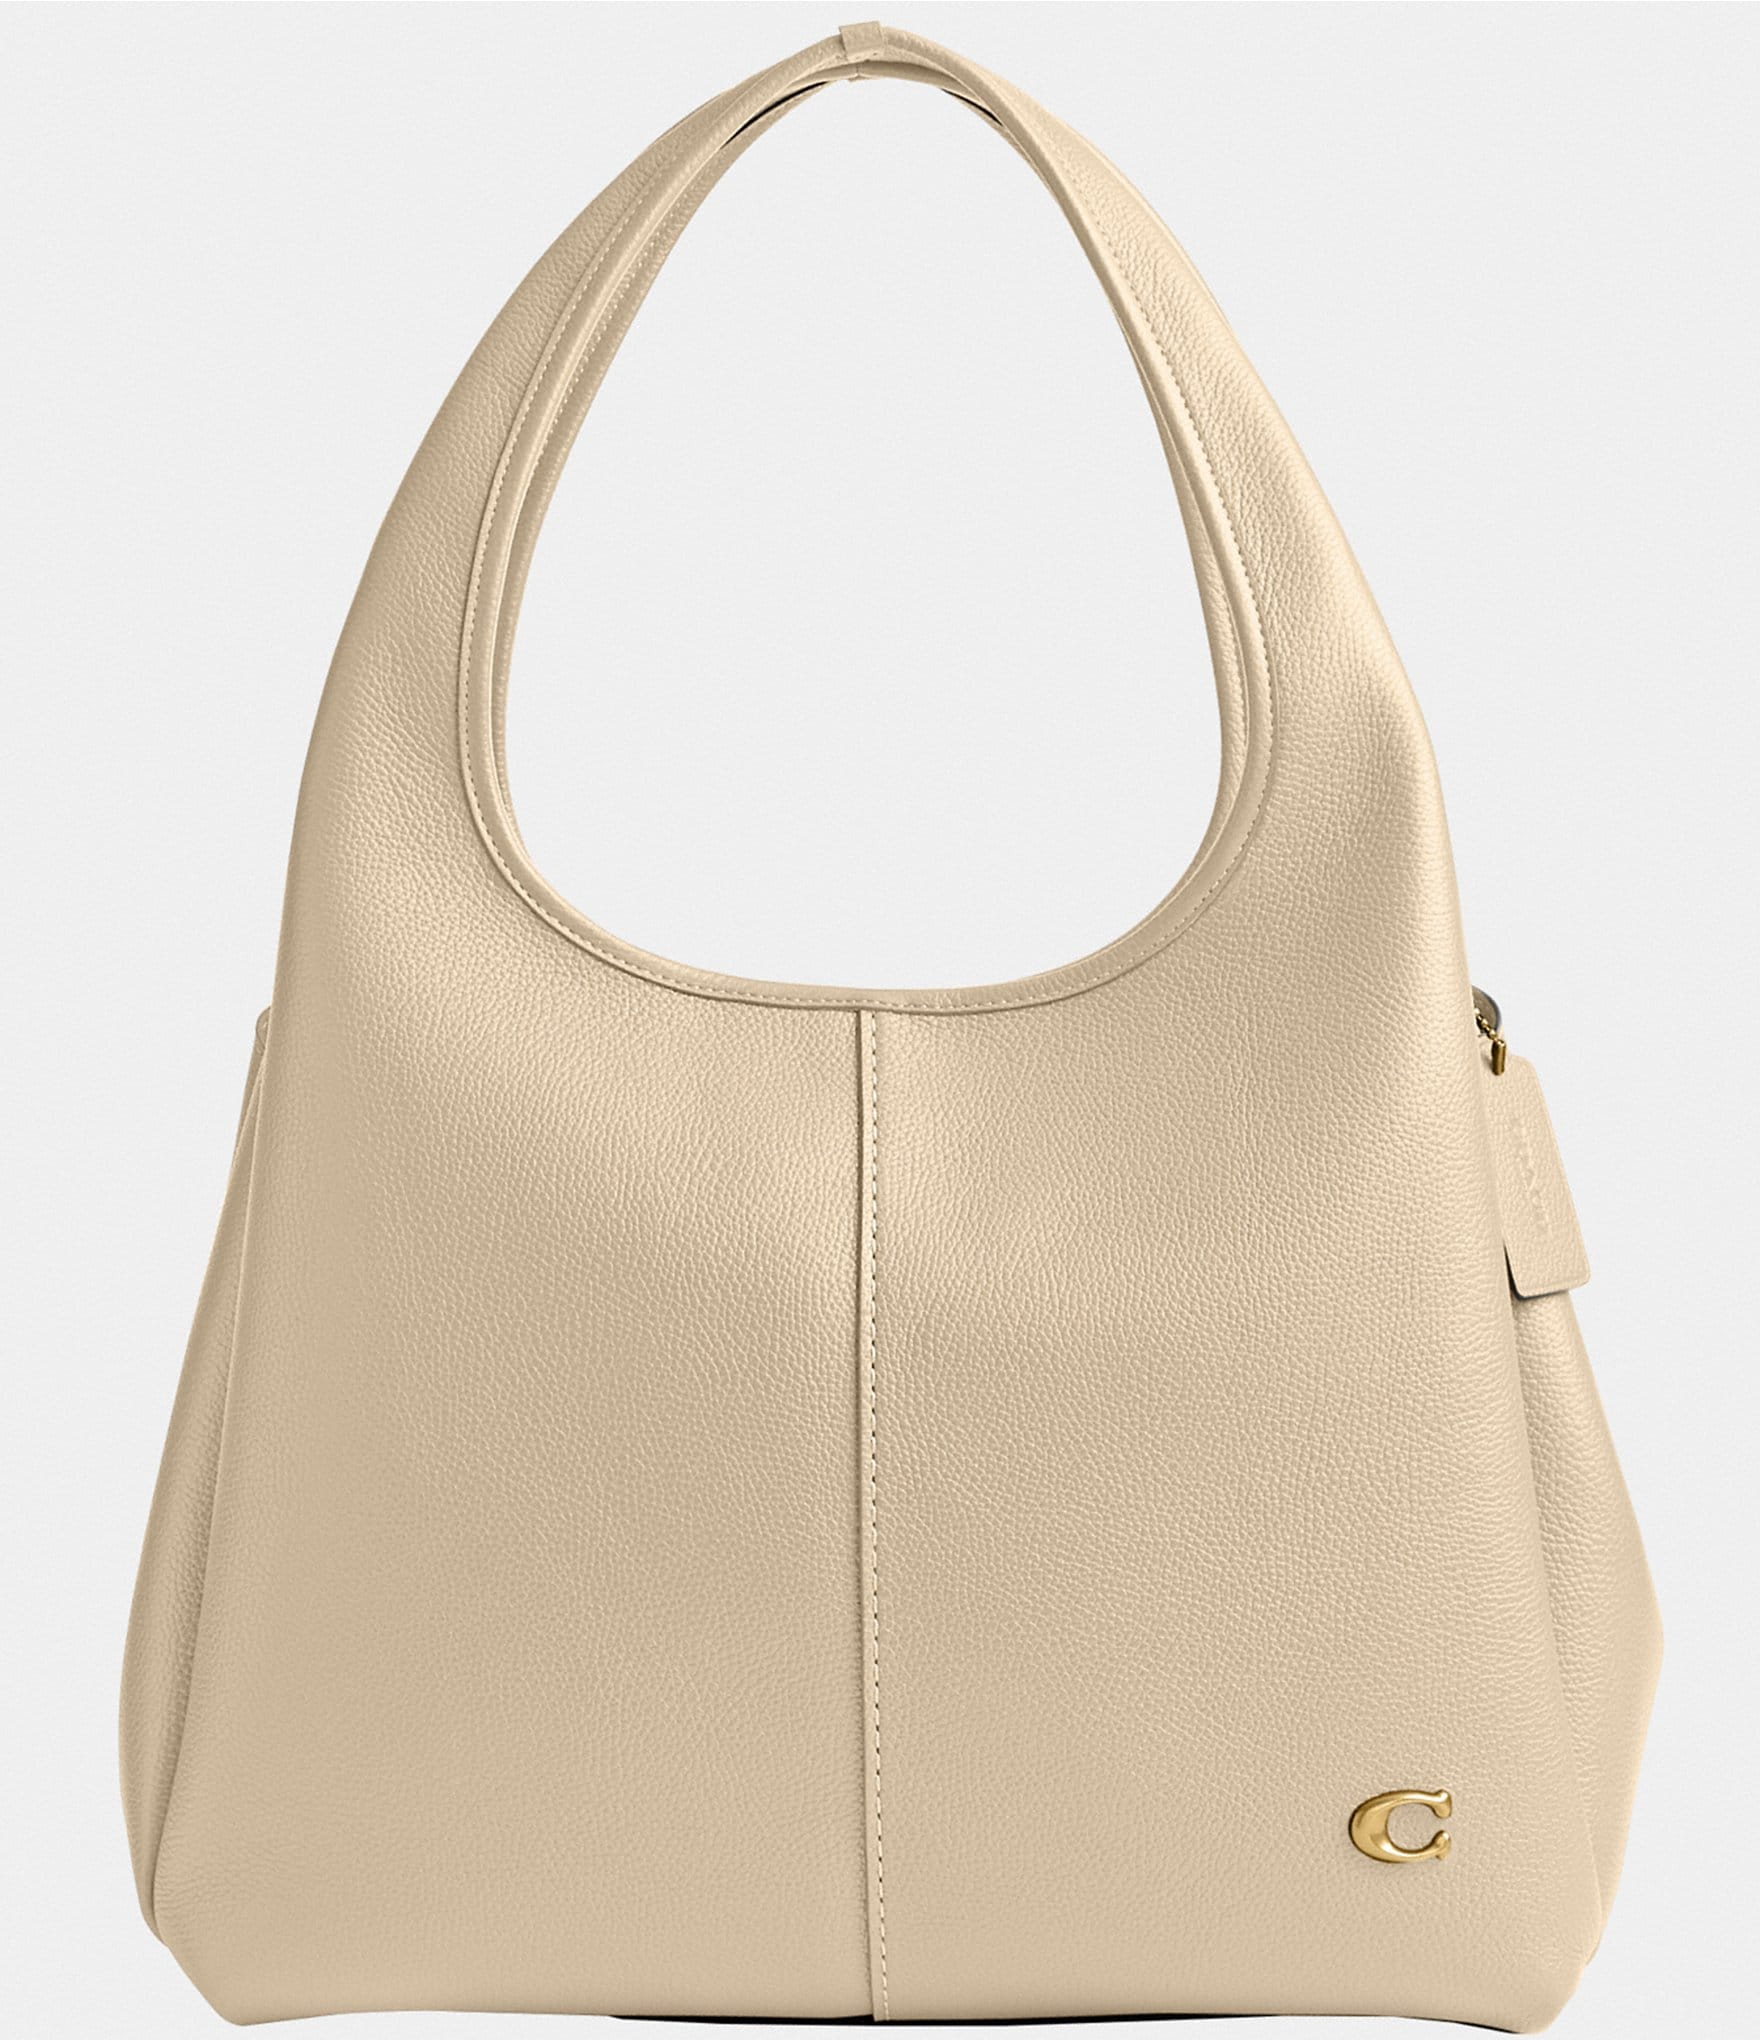 Ivory Shoulder Bags and Purses | Dillard's